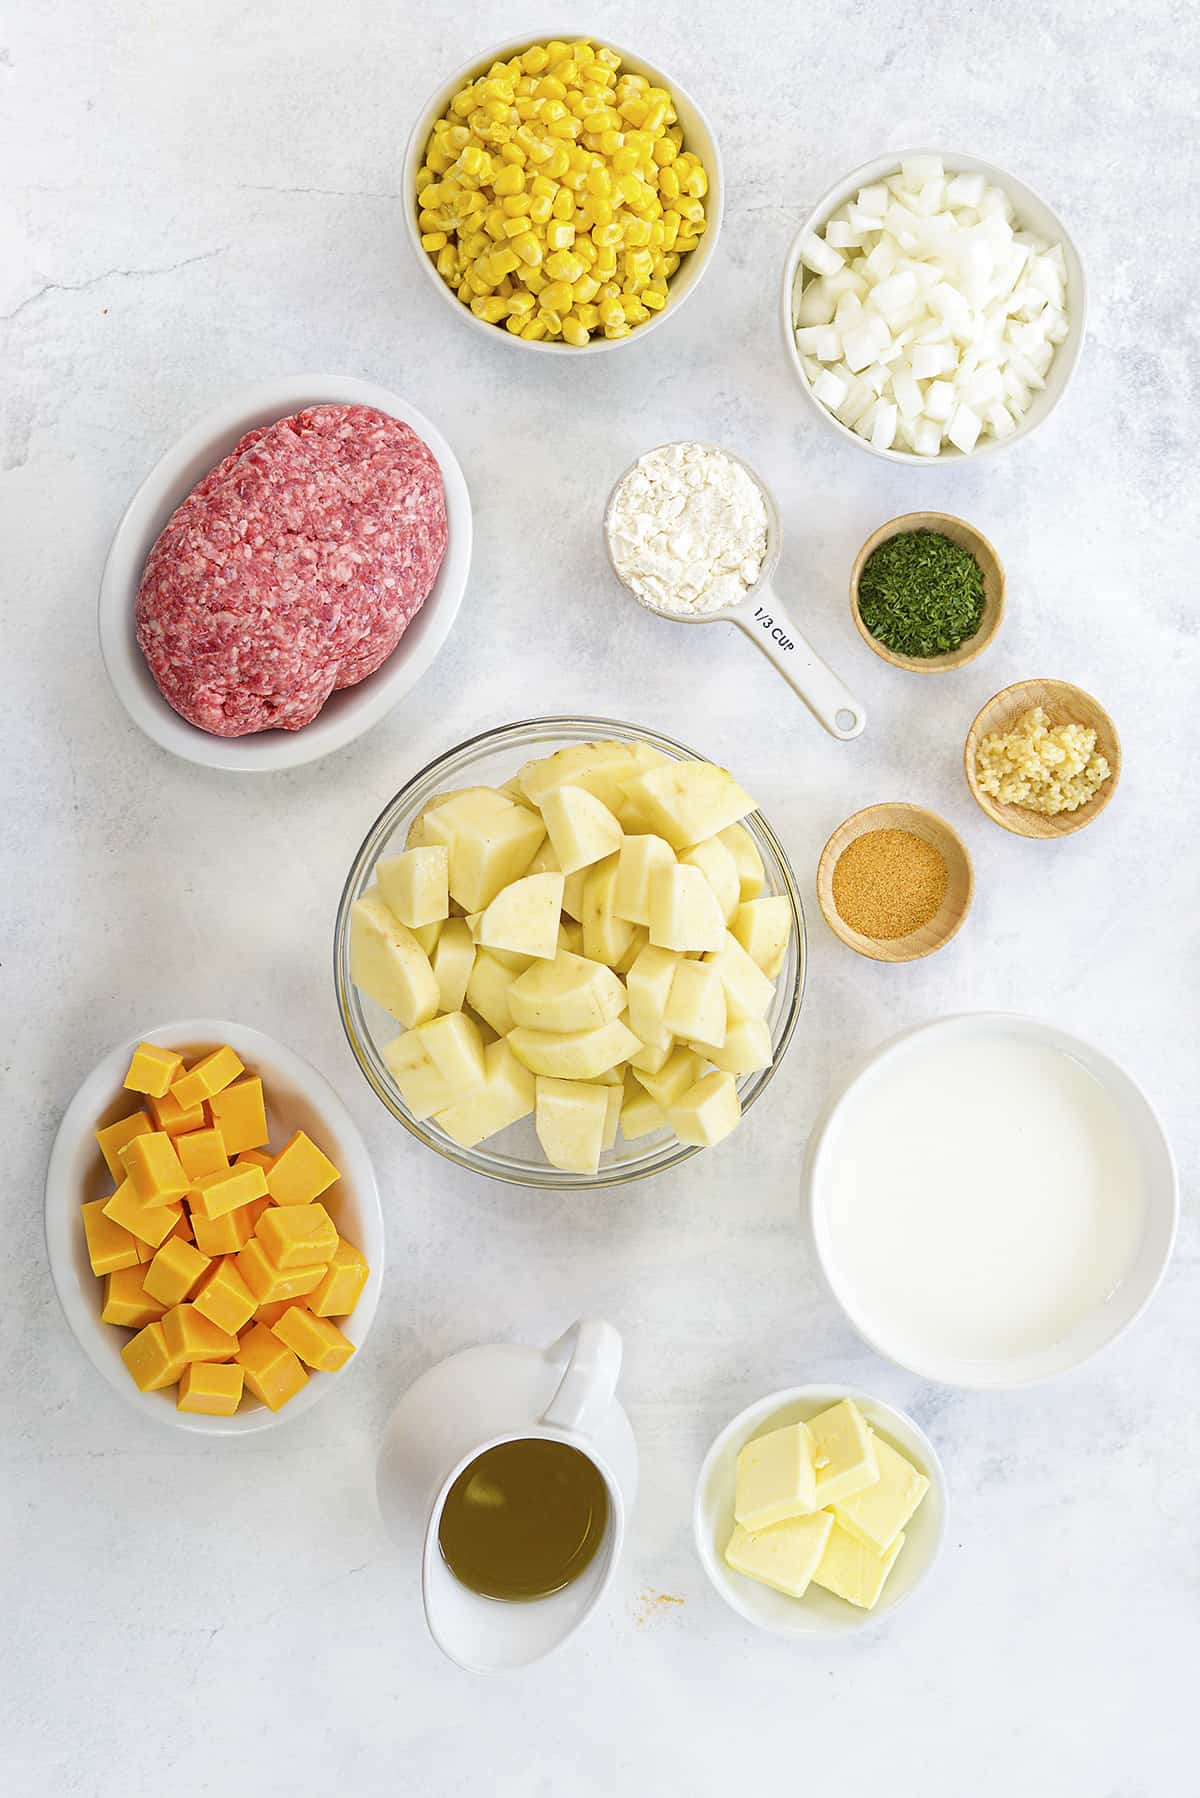 Ingredients for Cheeseburger Soup recipe.